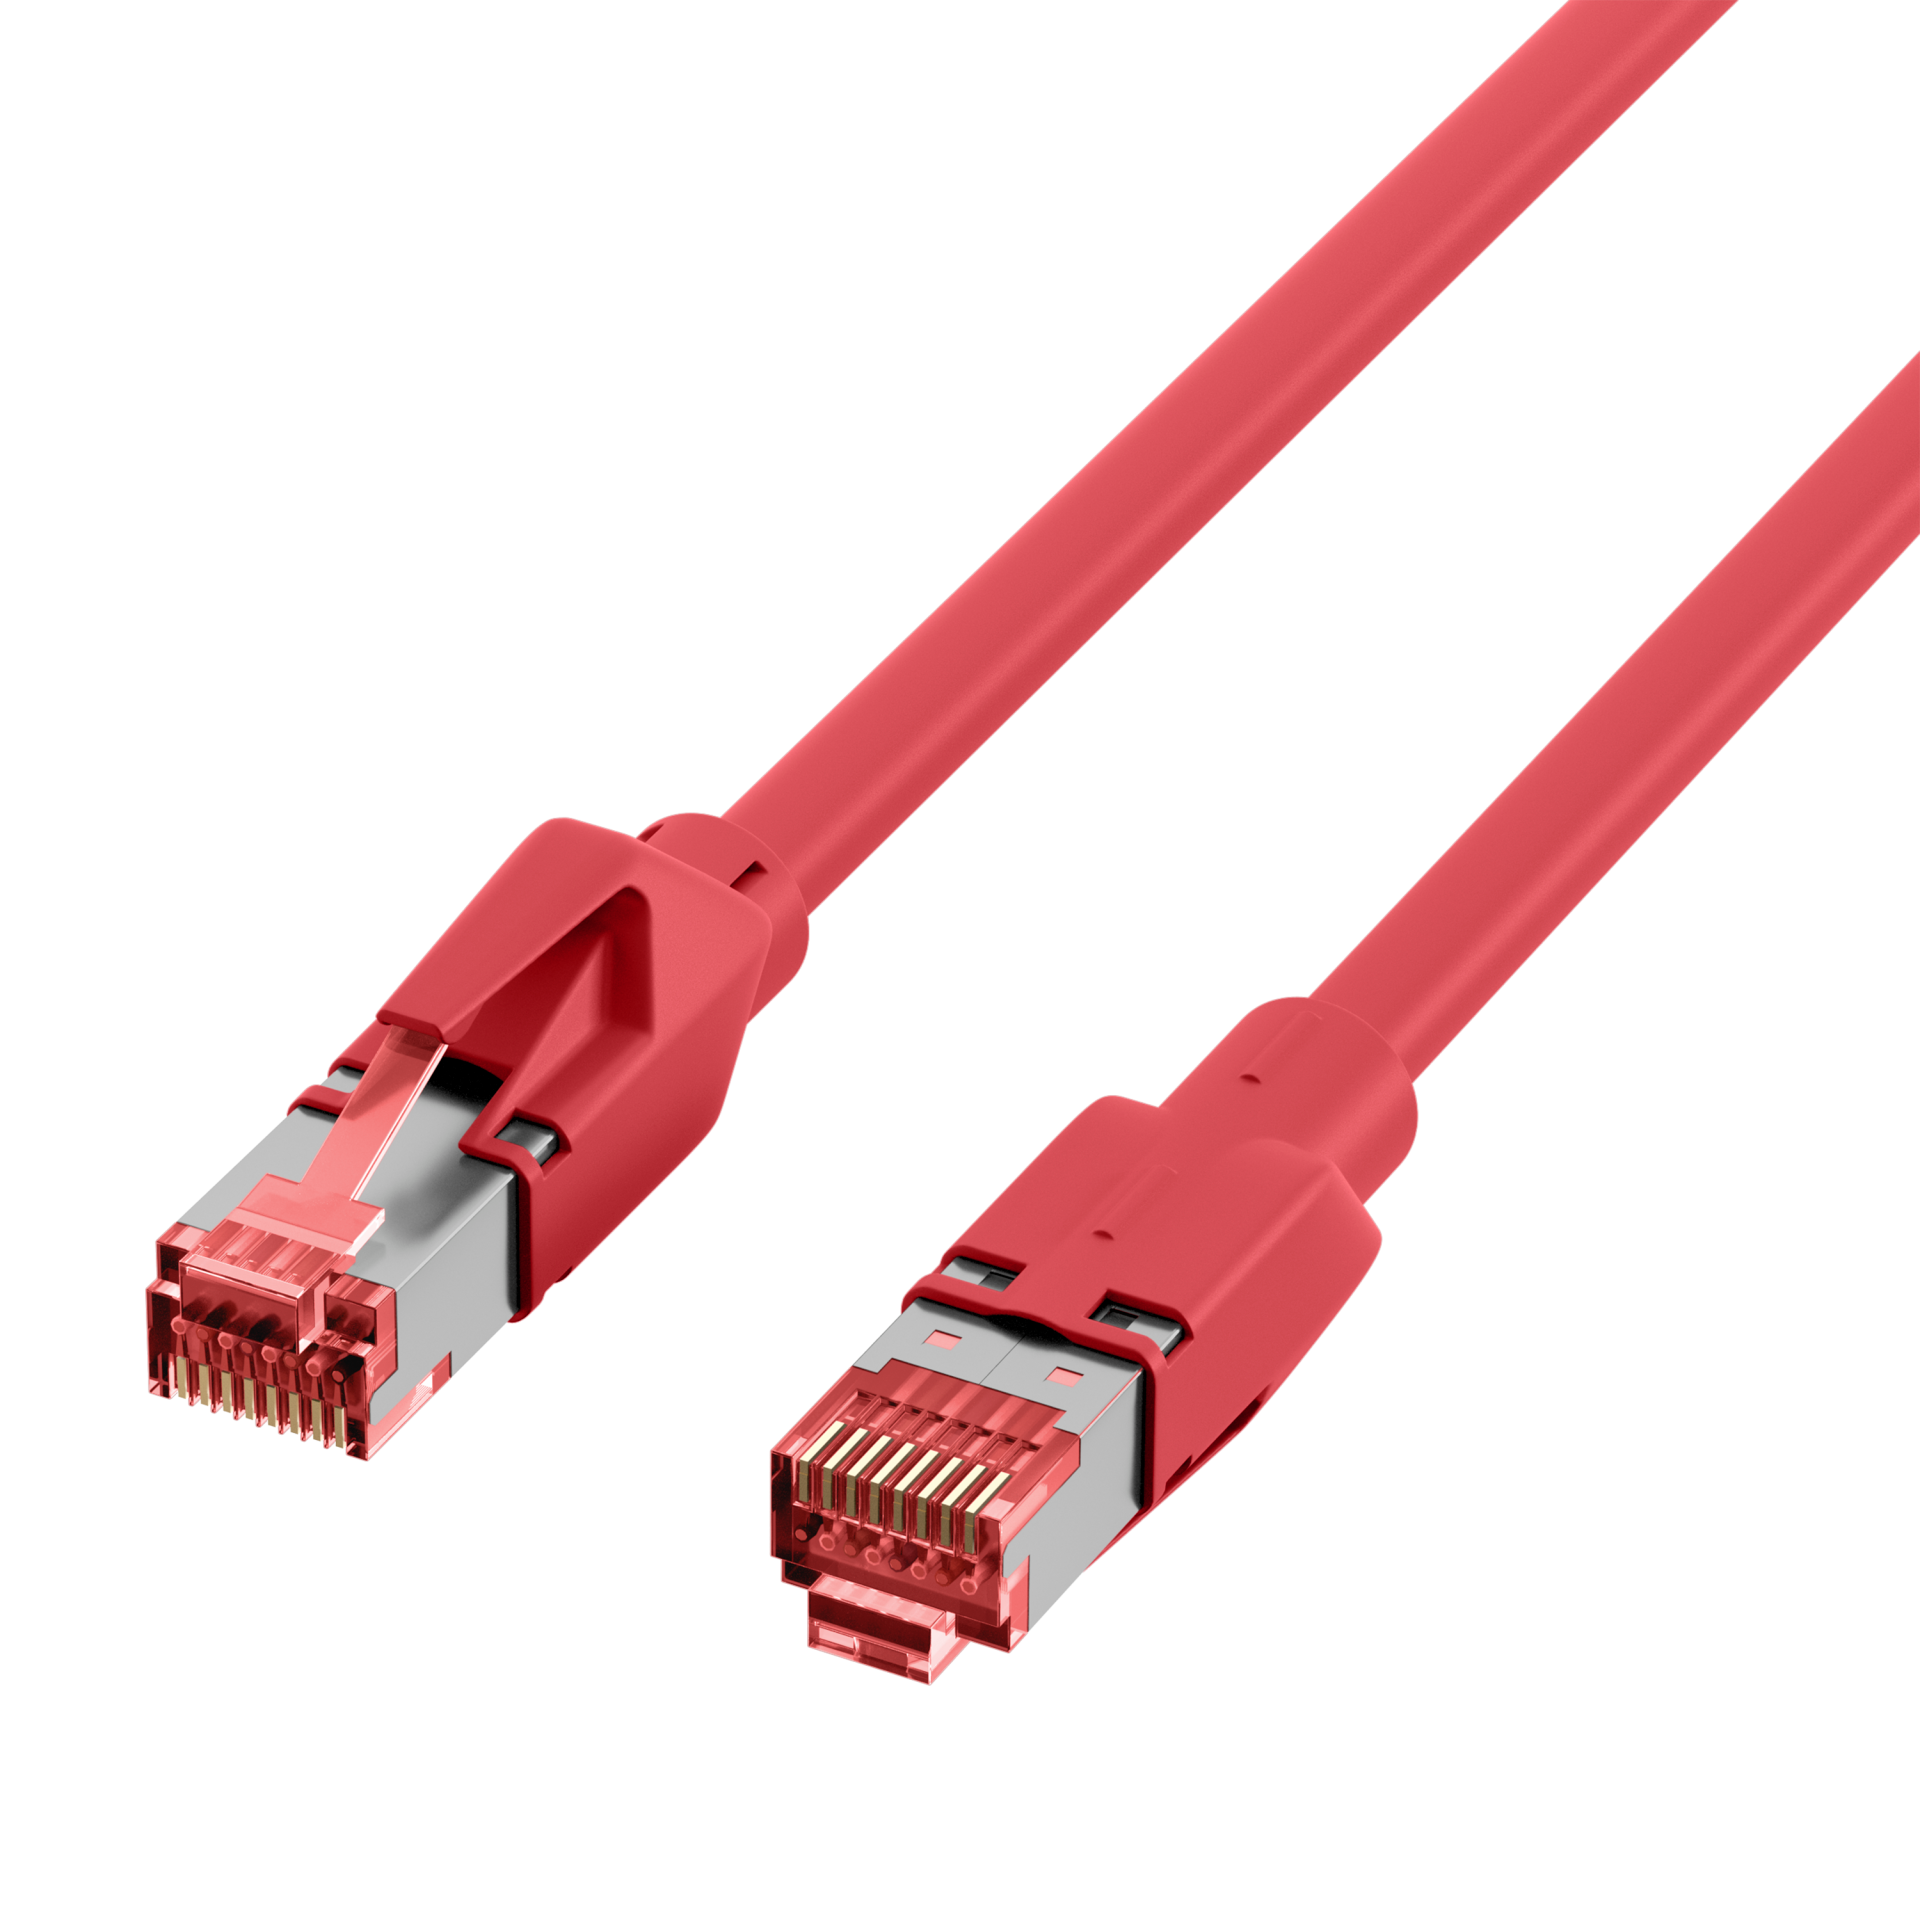 RJ45 Patch Cord Cat.6A S/FTP Dätwyler 7702 TM21 red 30m